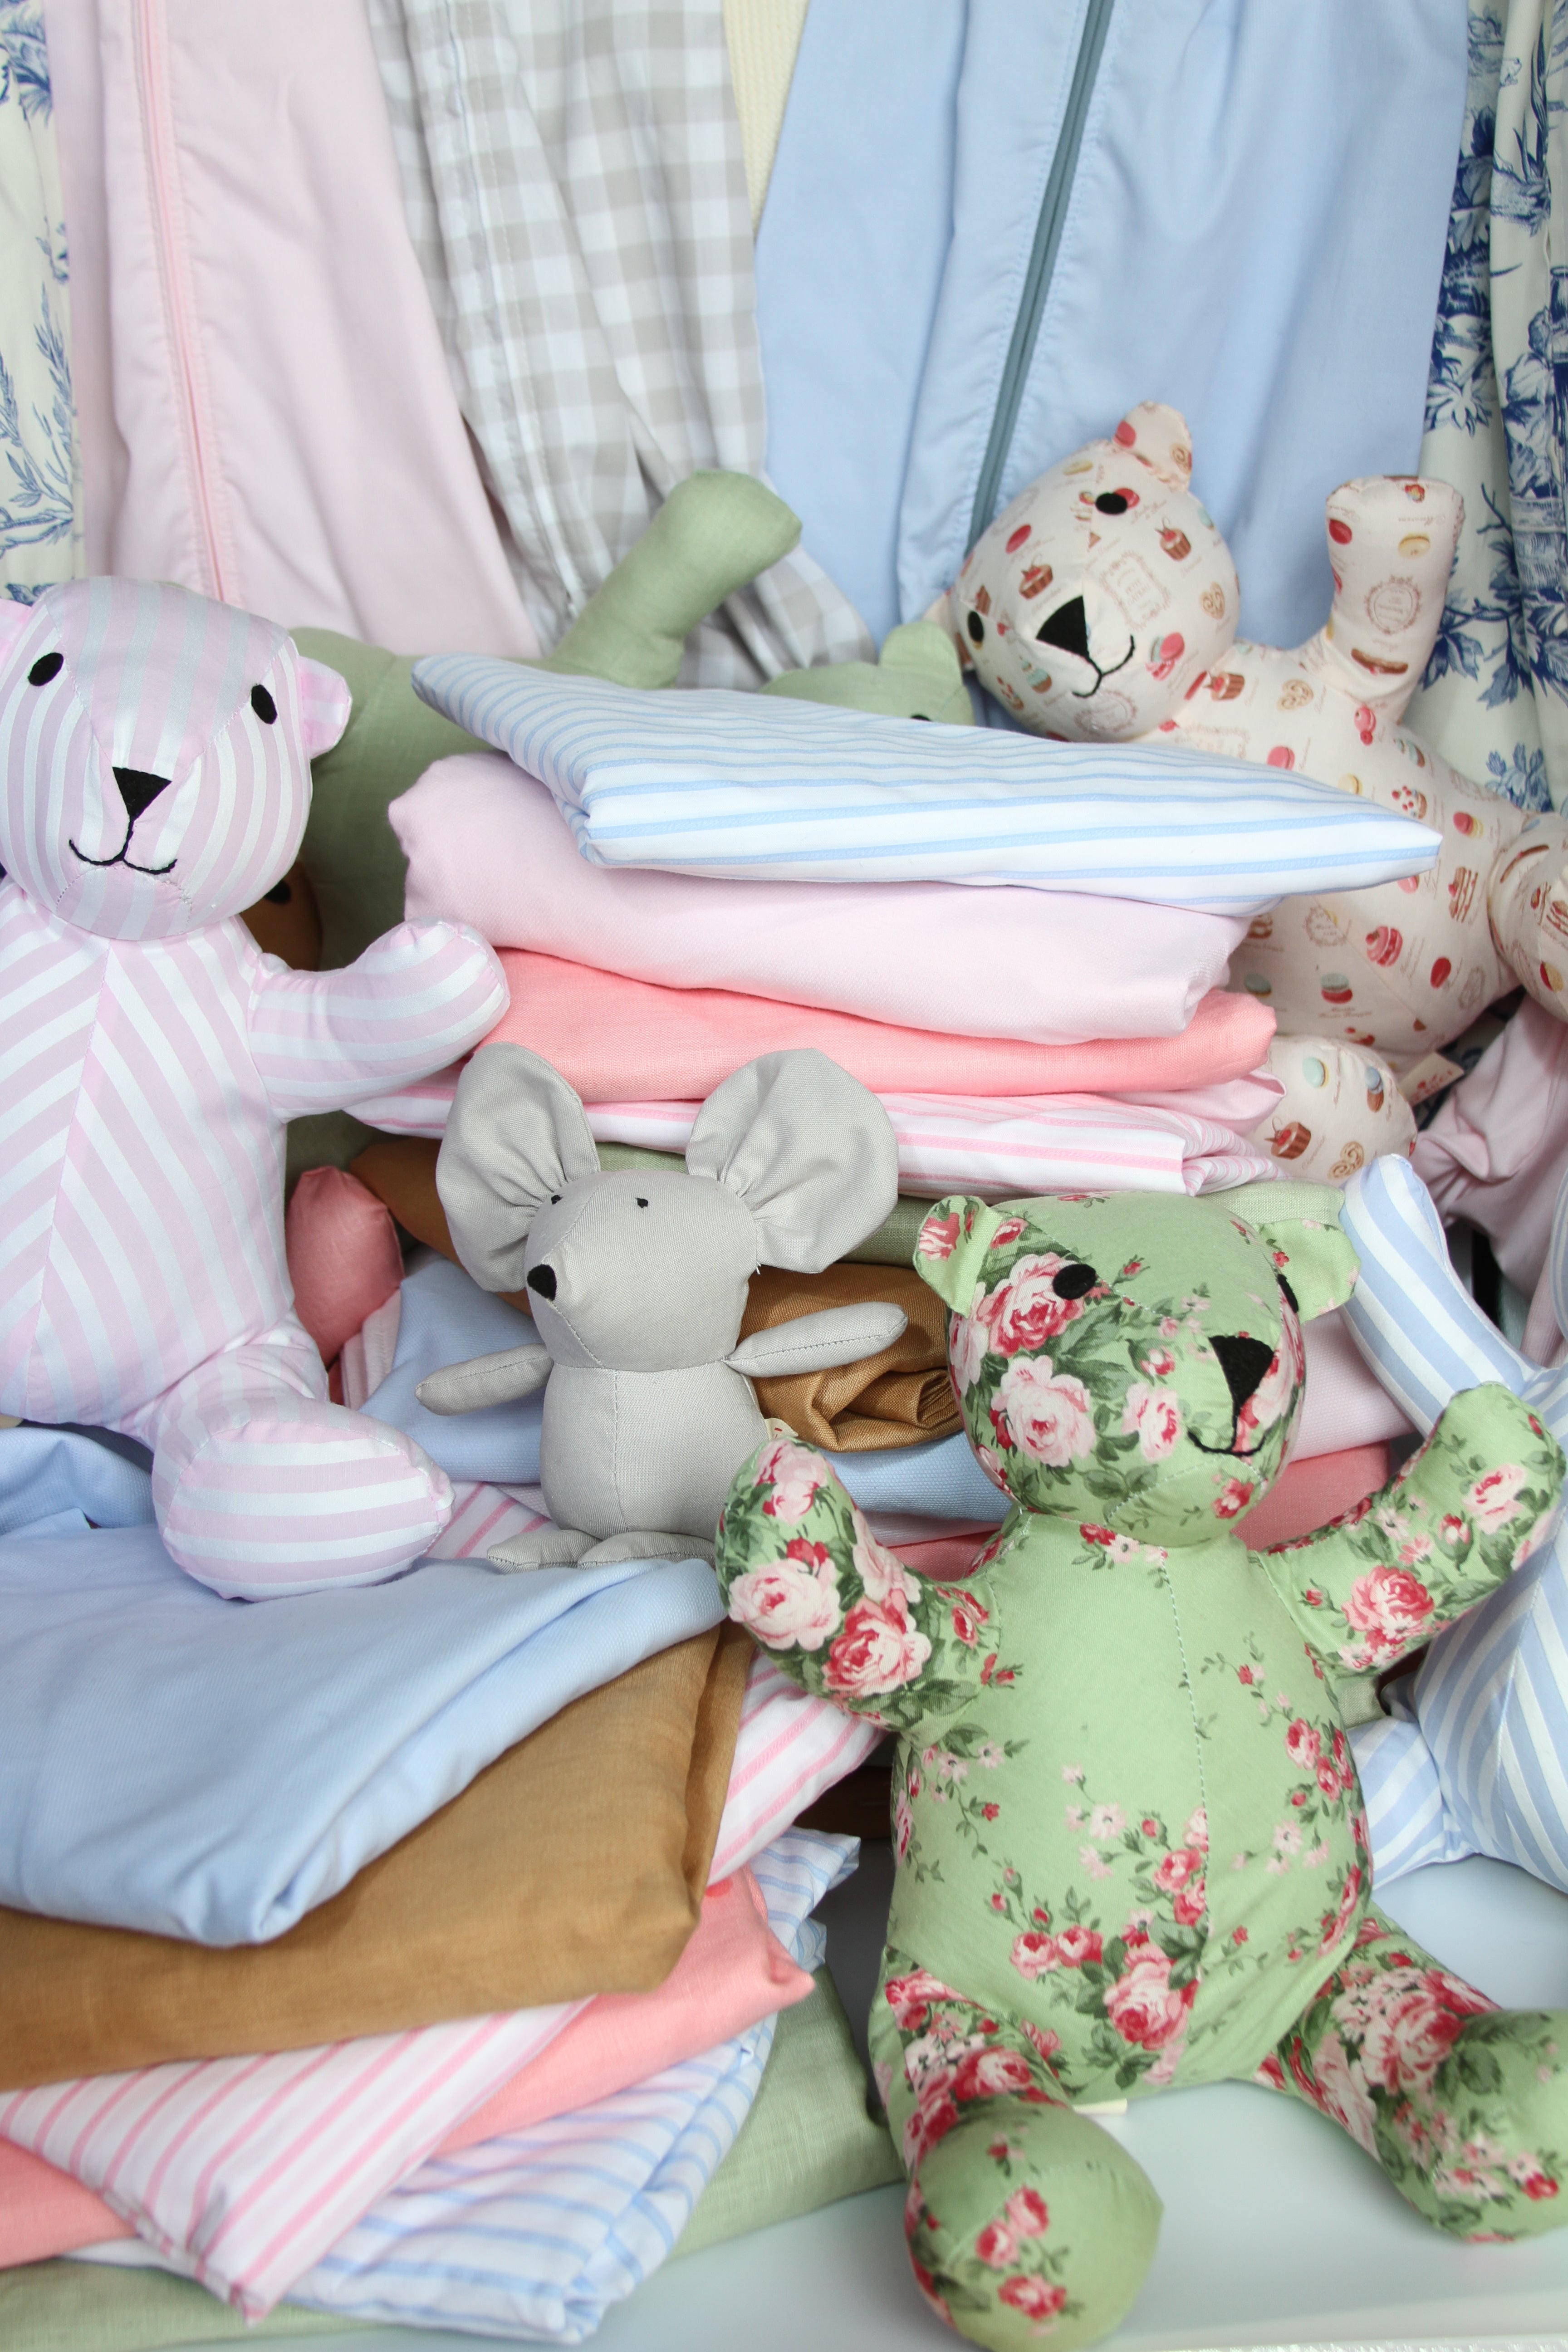 Teddy Bear in Pink and White Stripe Cotton